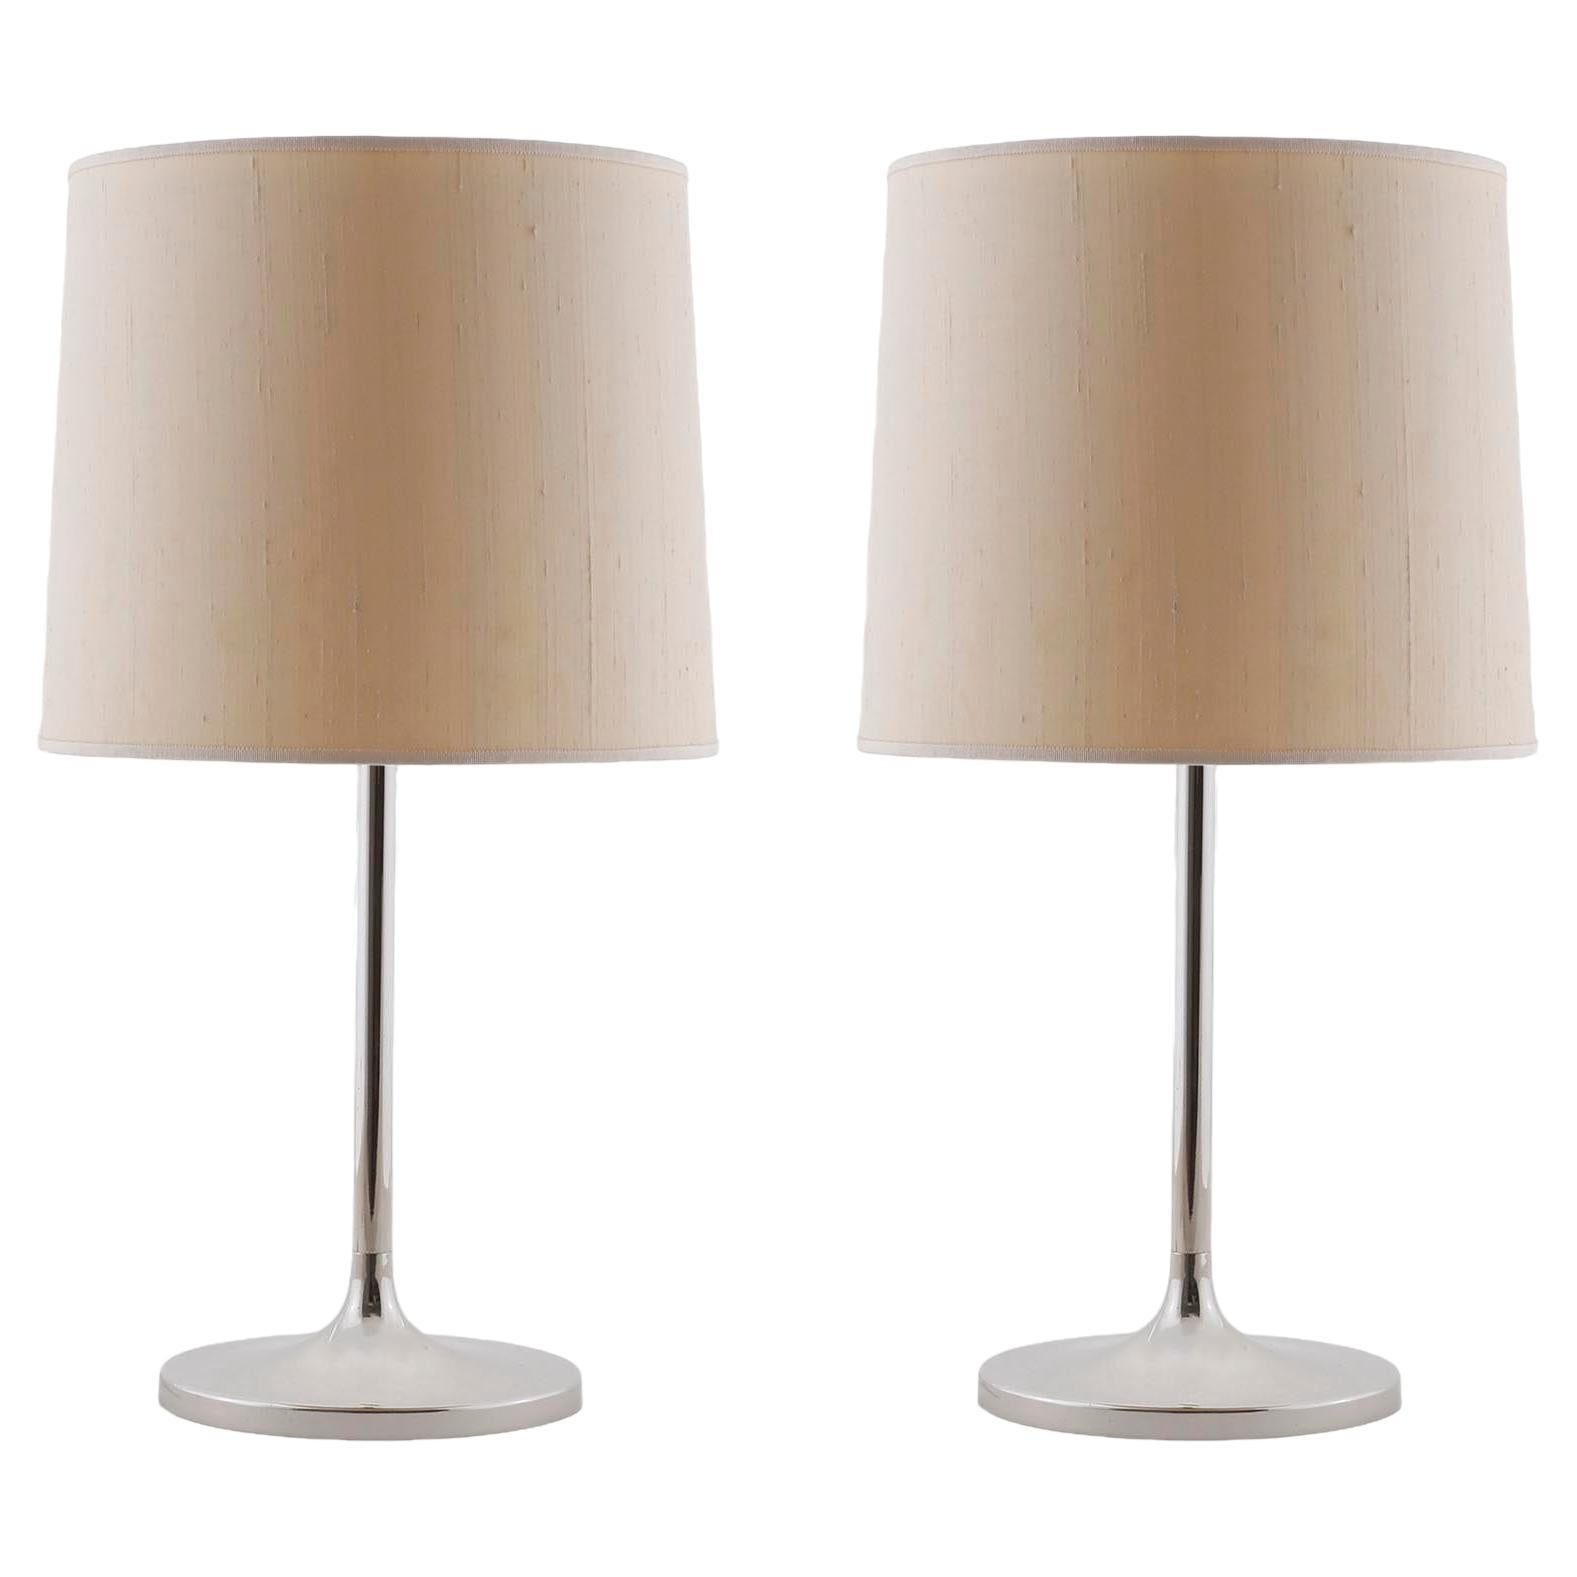 Pair of Kalmar Table Lamps with Tulip Base, Polished Nickel, Beige Shade, 1970 For Sale